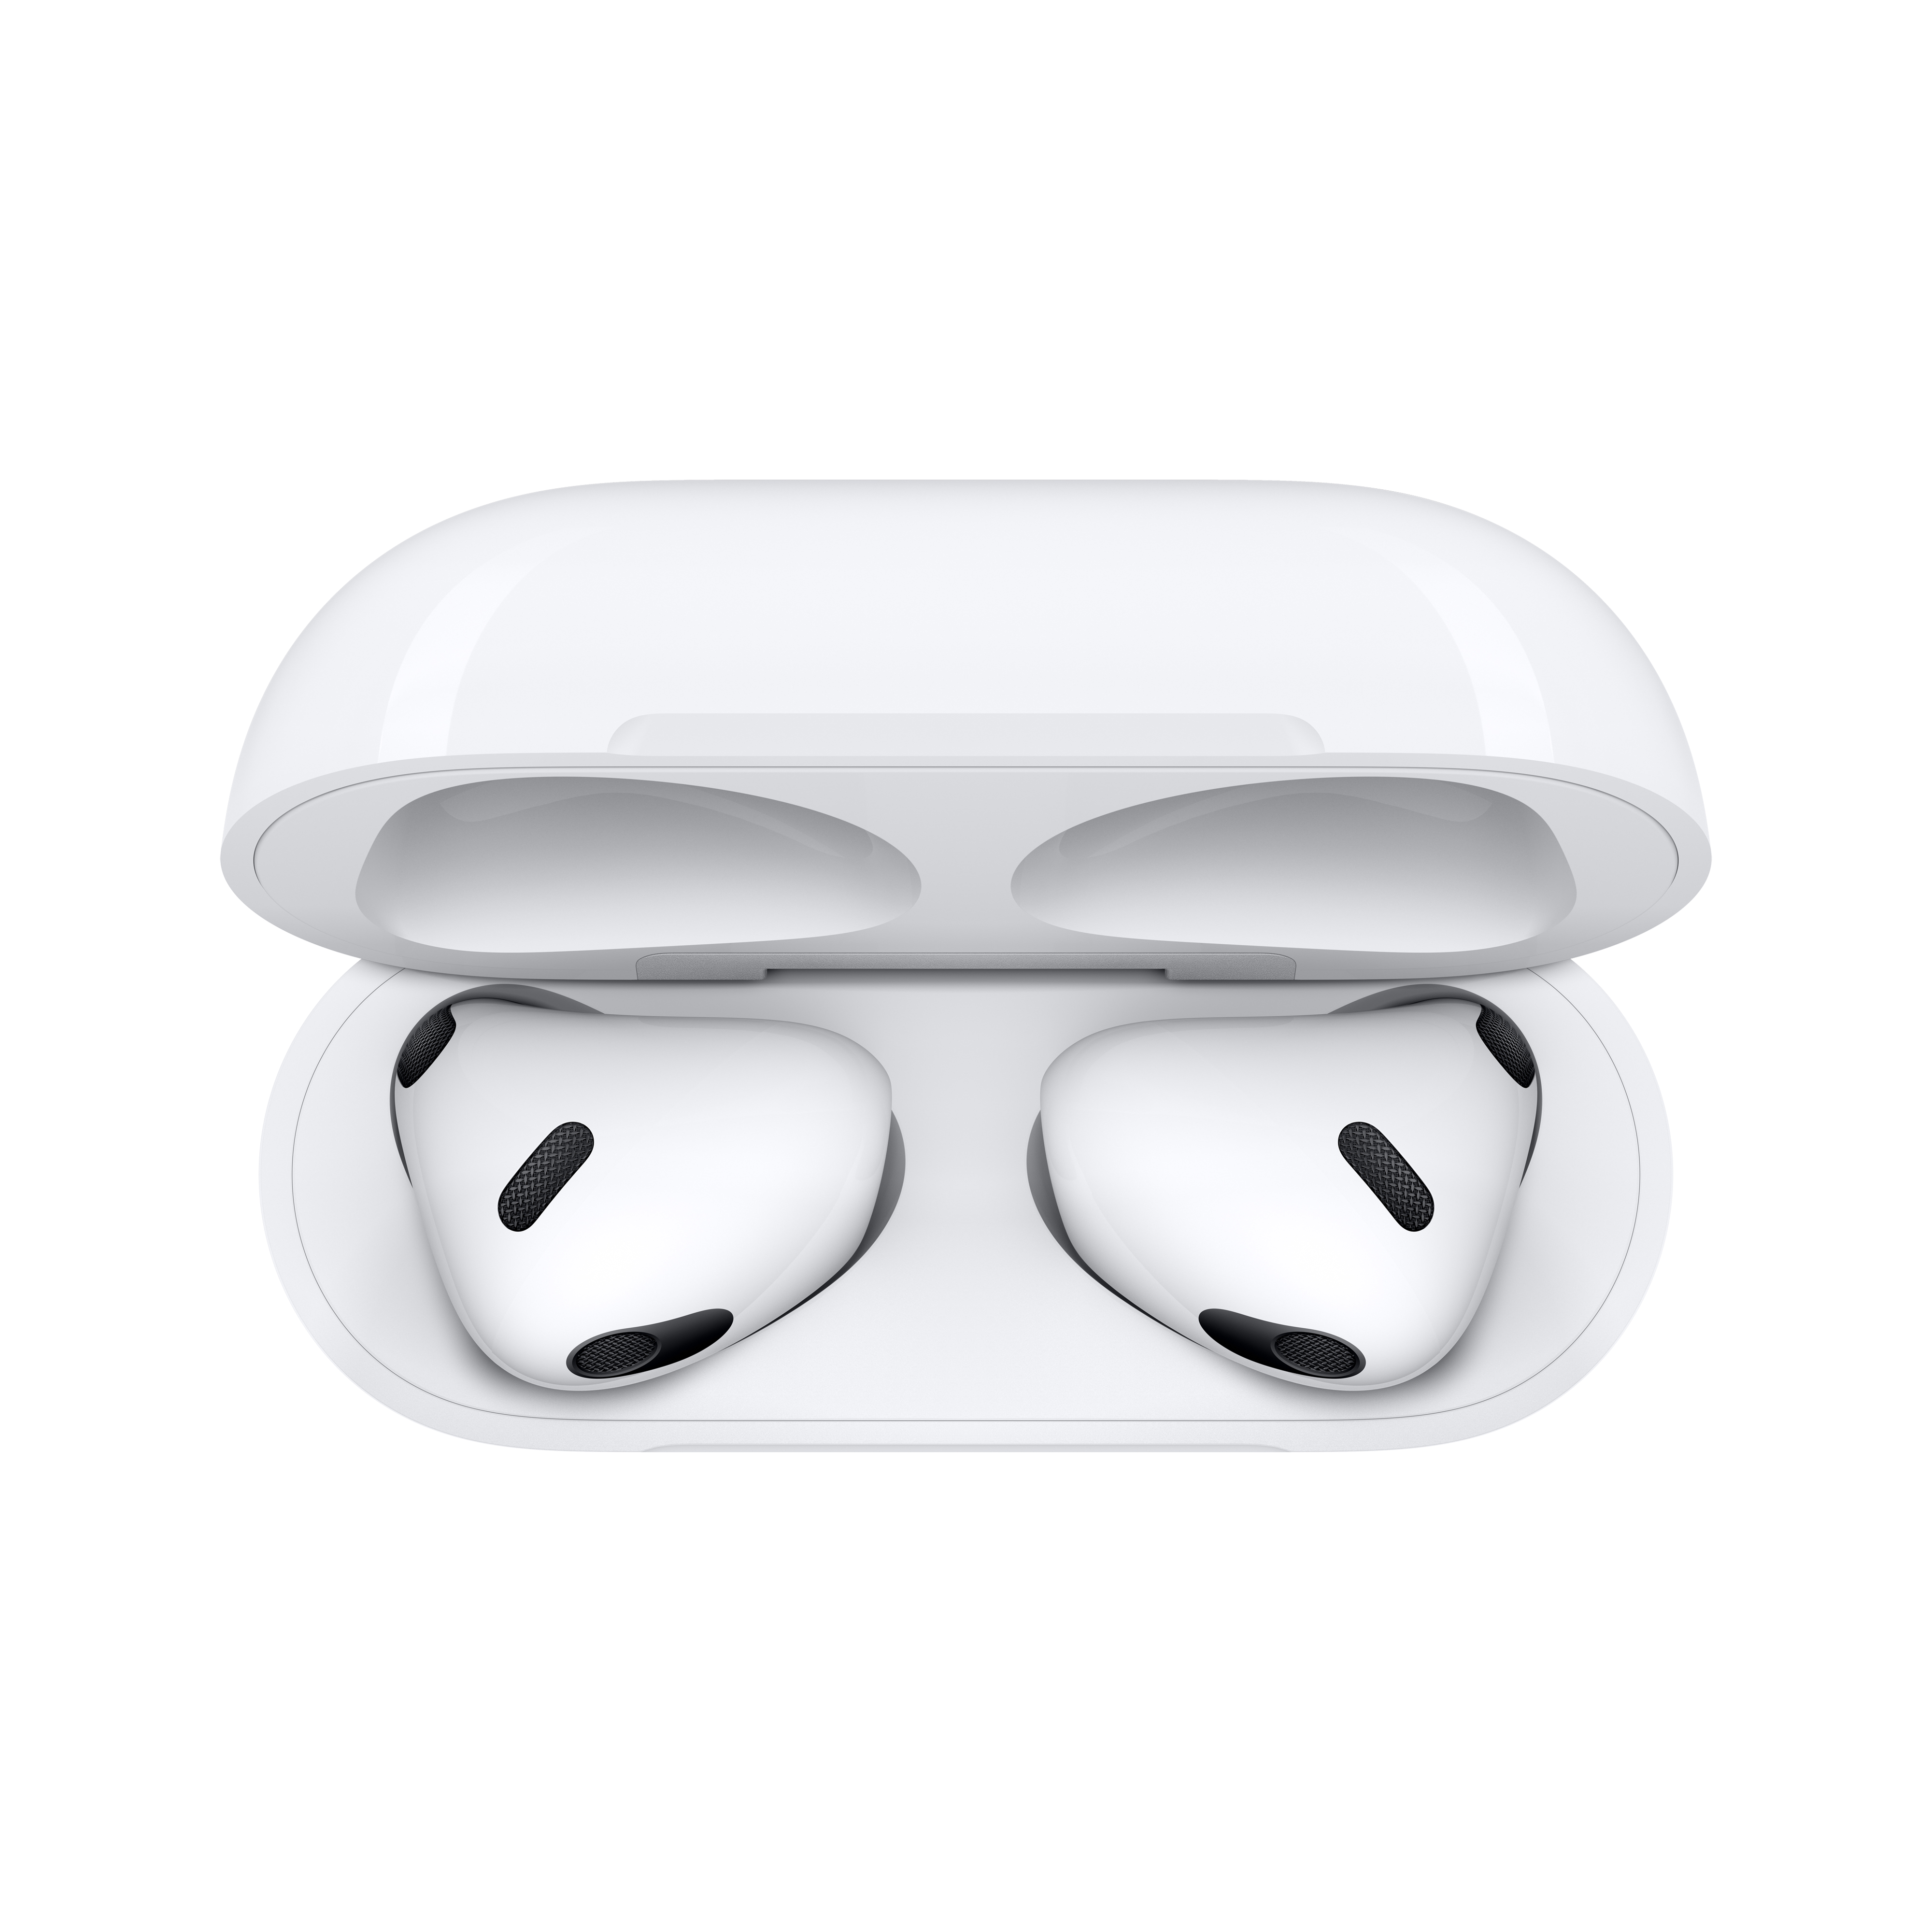 Apple AirPods (3rd Generation) - image 4 of 6